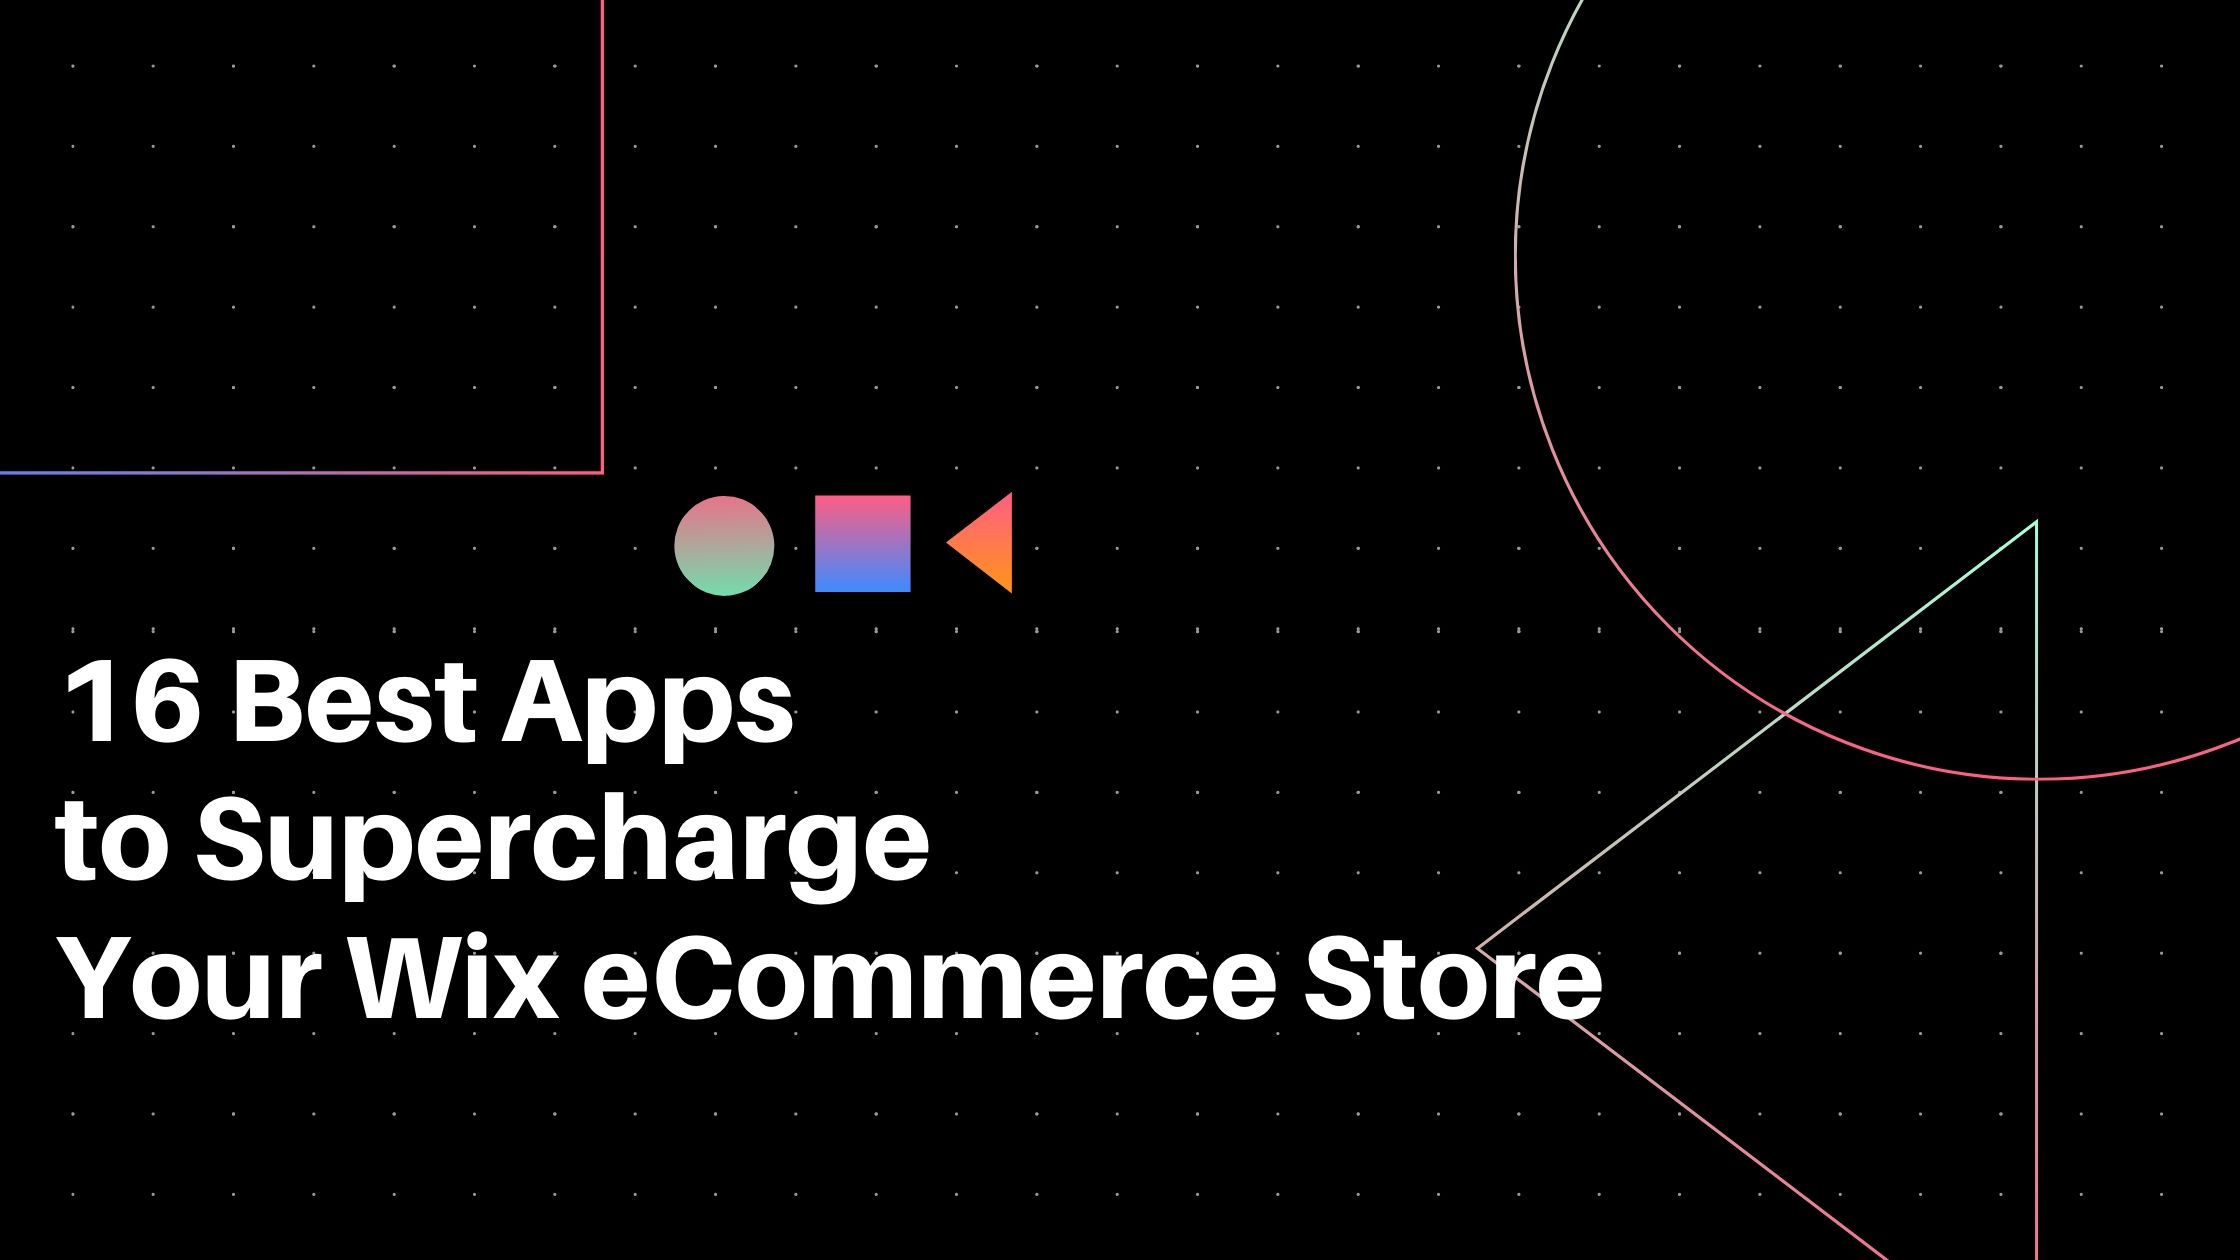 Wix Stores: Managing Your Orders from the Wix Owner App